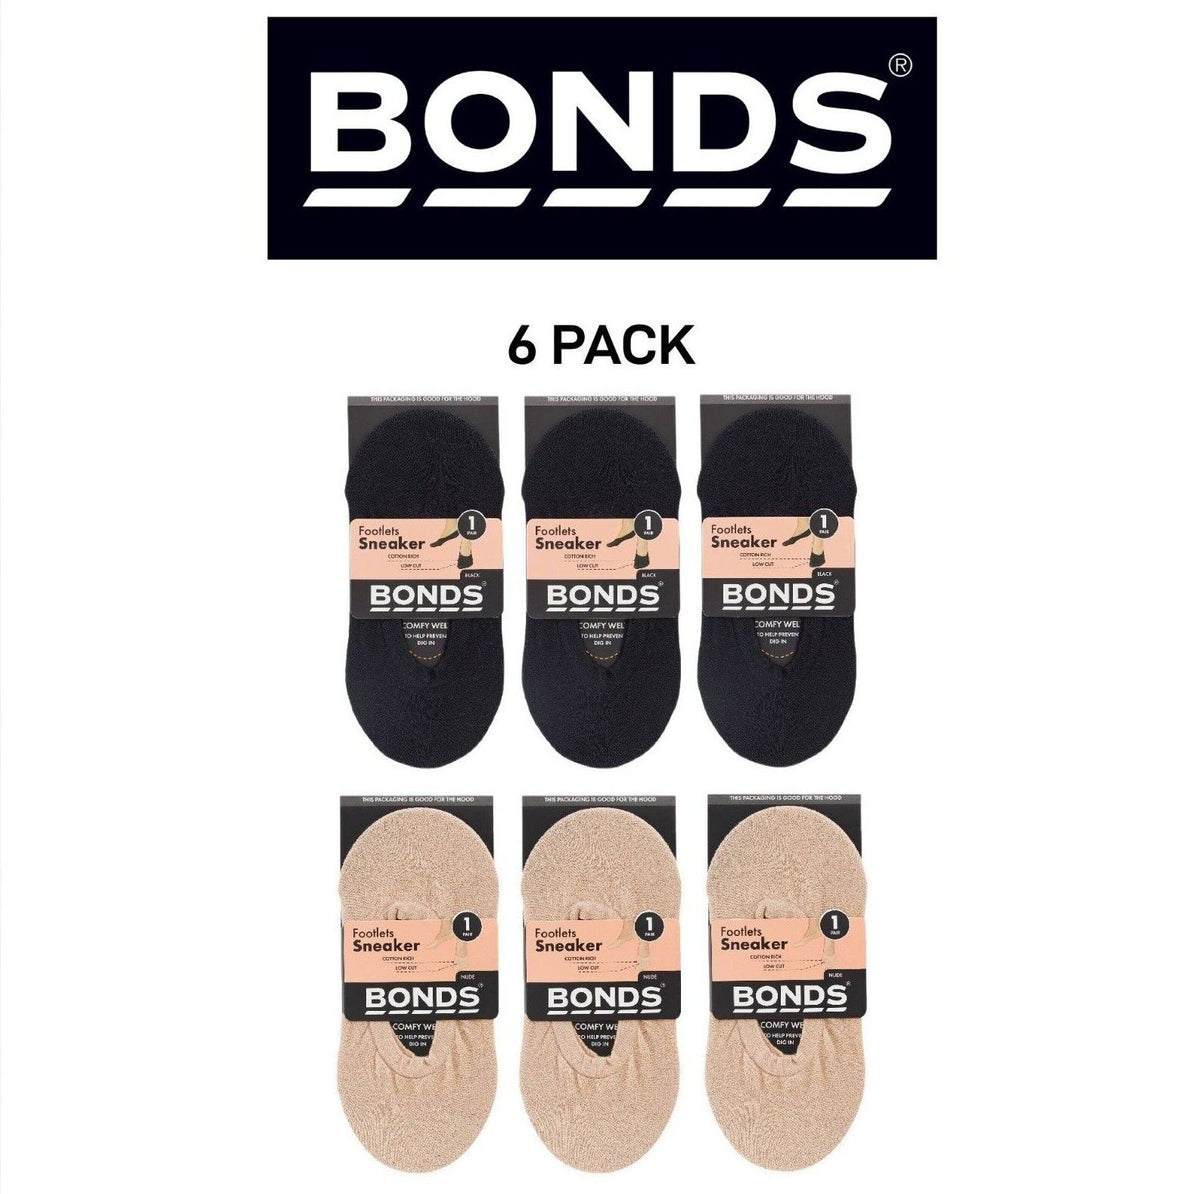 Bonds Womens No Show Footlets Cotton Rich Stocking Socks Seamless 6 Pack L7344W